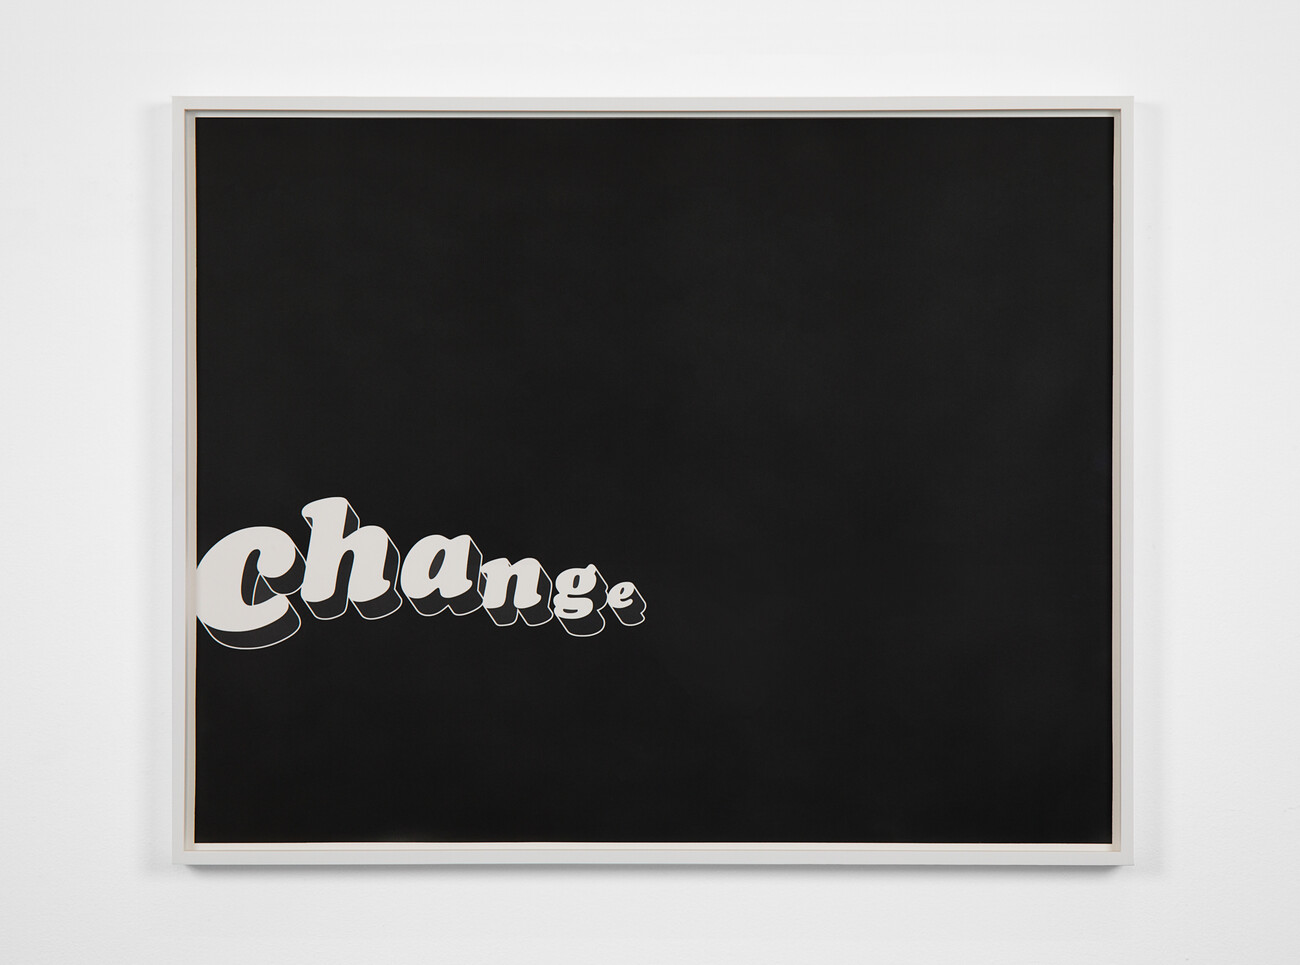 Framed work with black background and the word 'change' in foreground